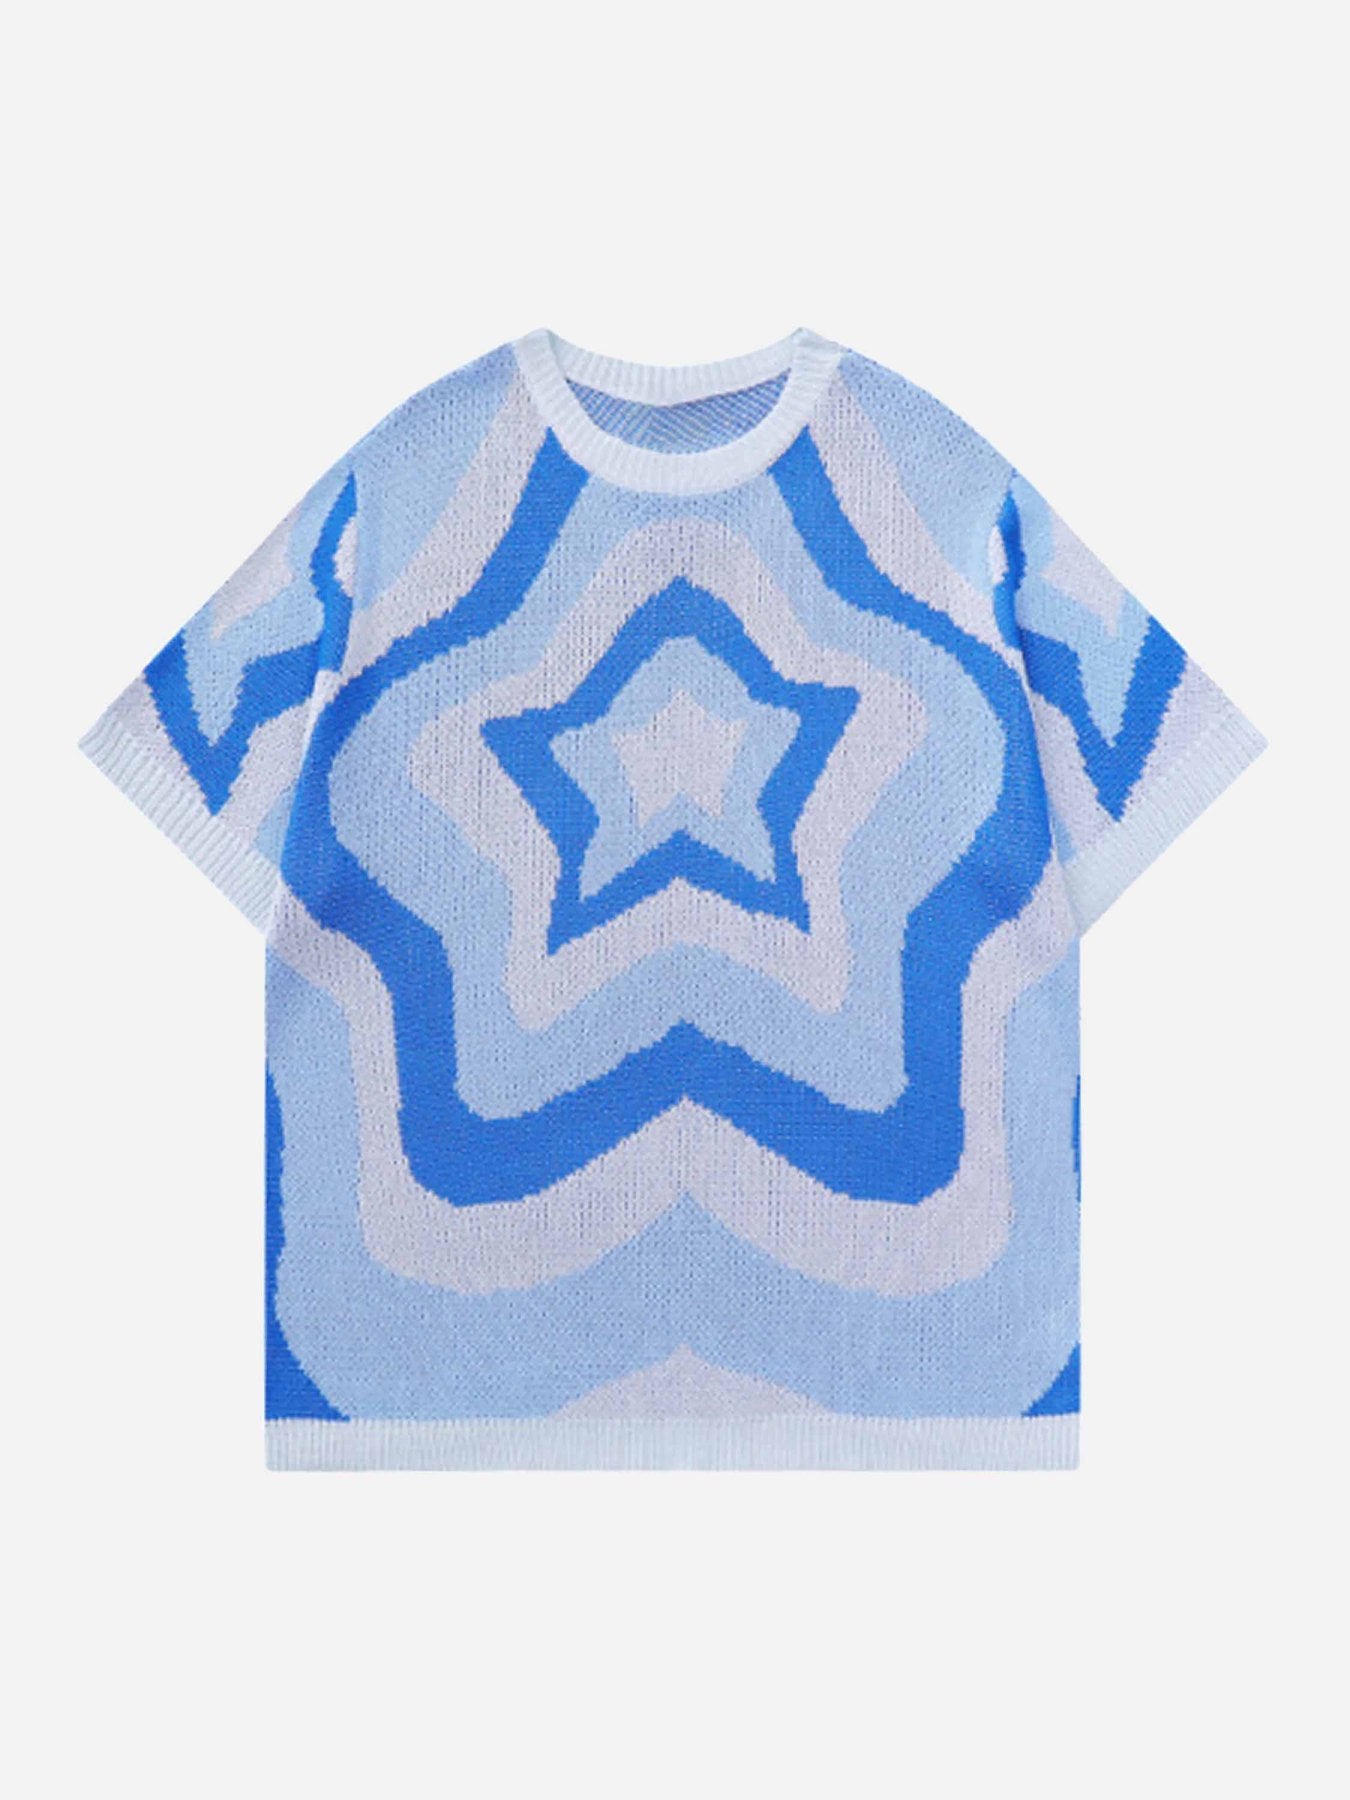 The Supermade Knit Stars And Stripes T-Shirt